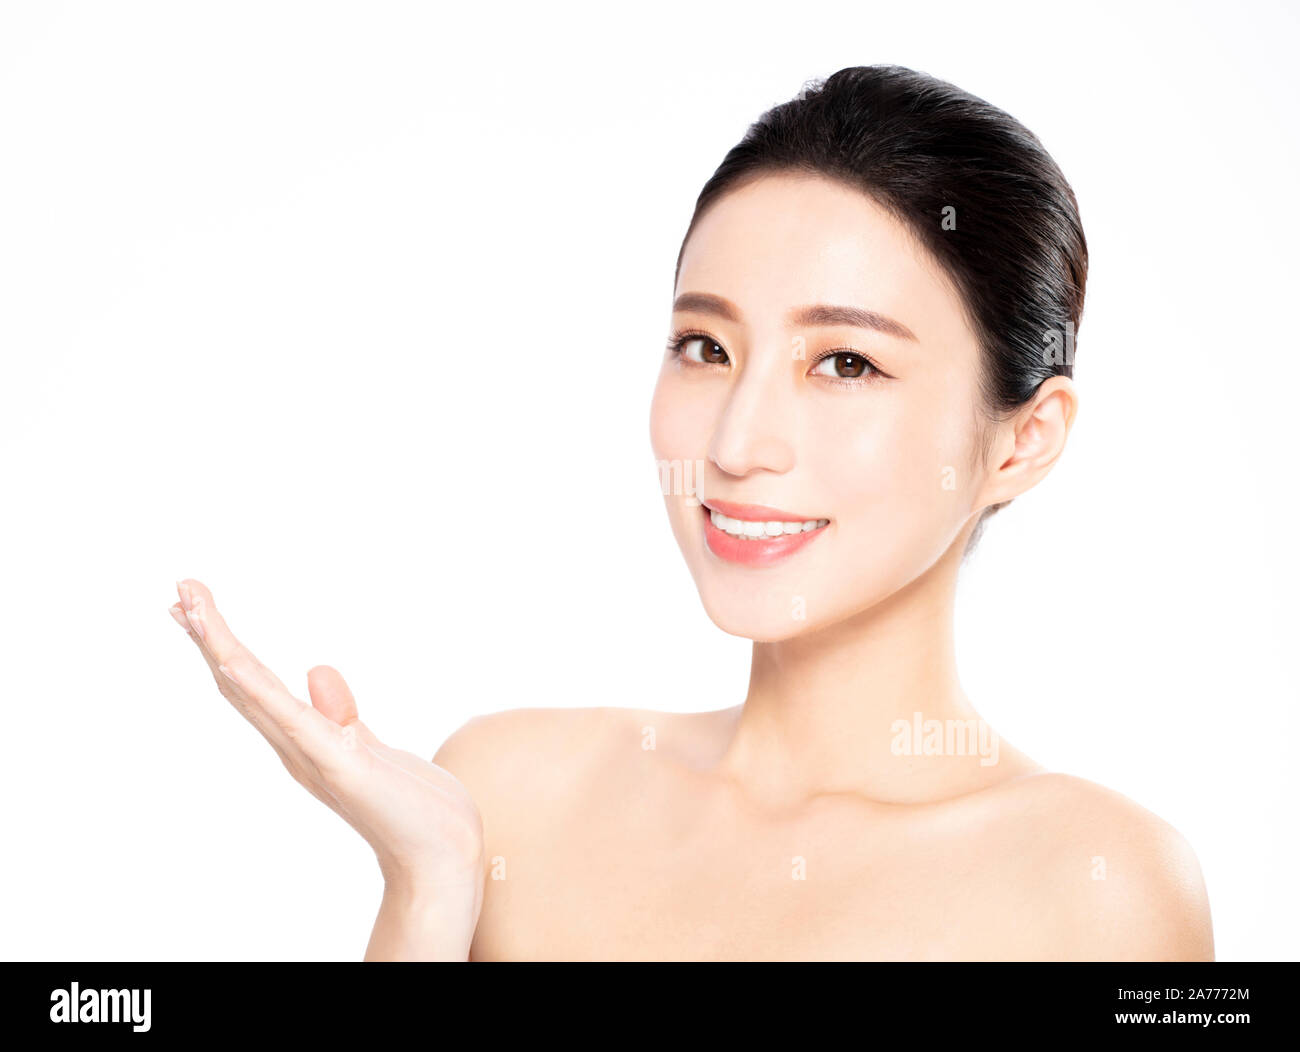 Beautiful face of young woman with clean fresh skin Stock Photo